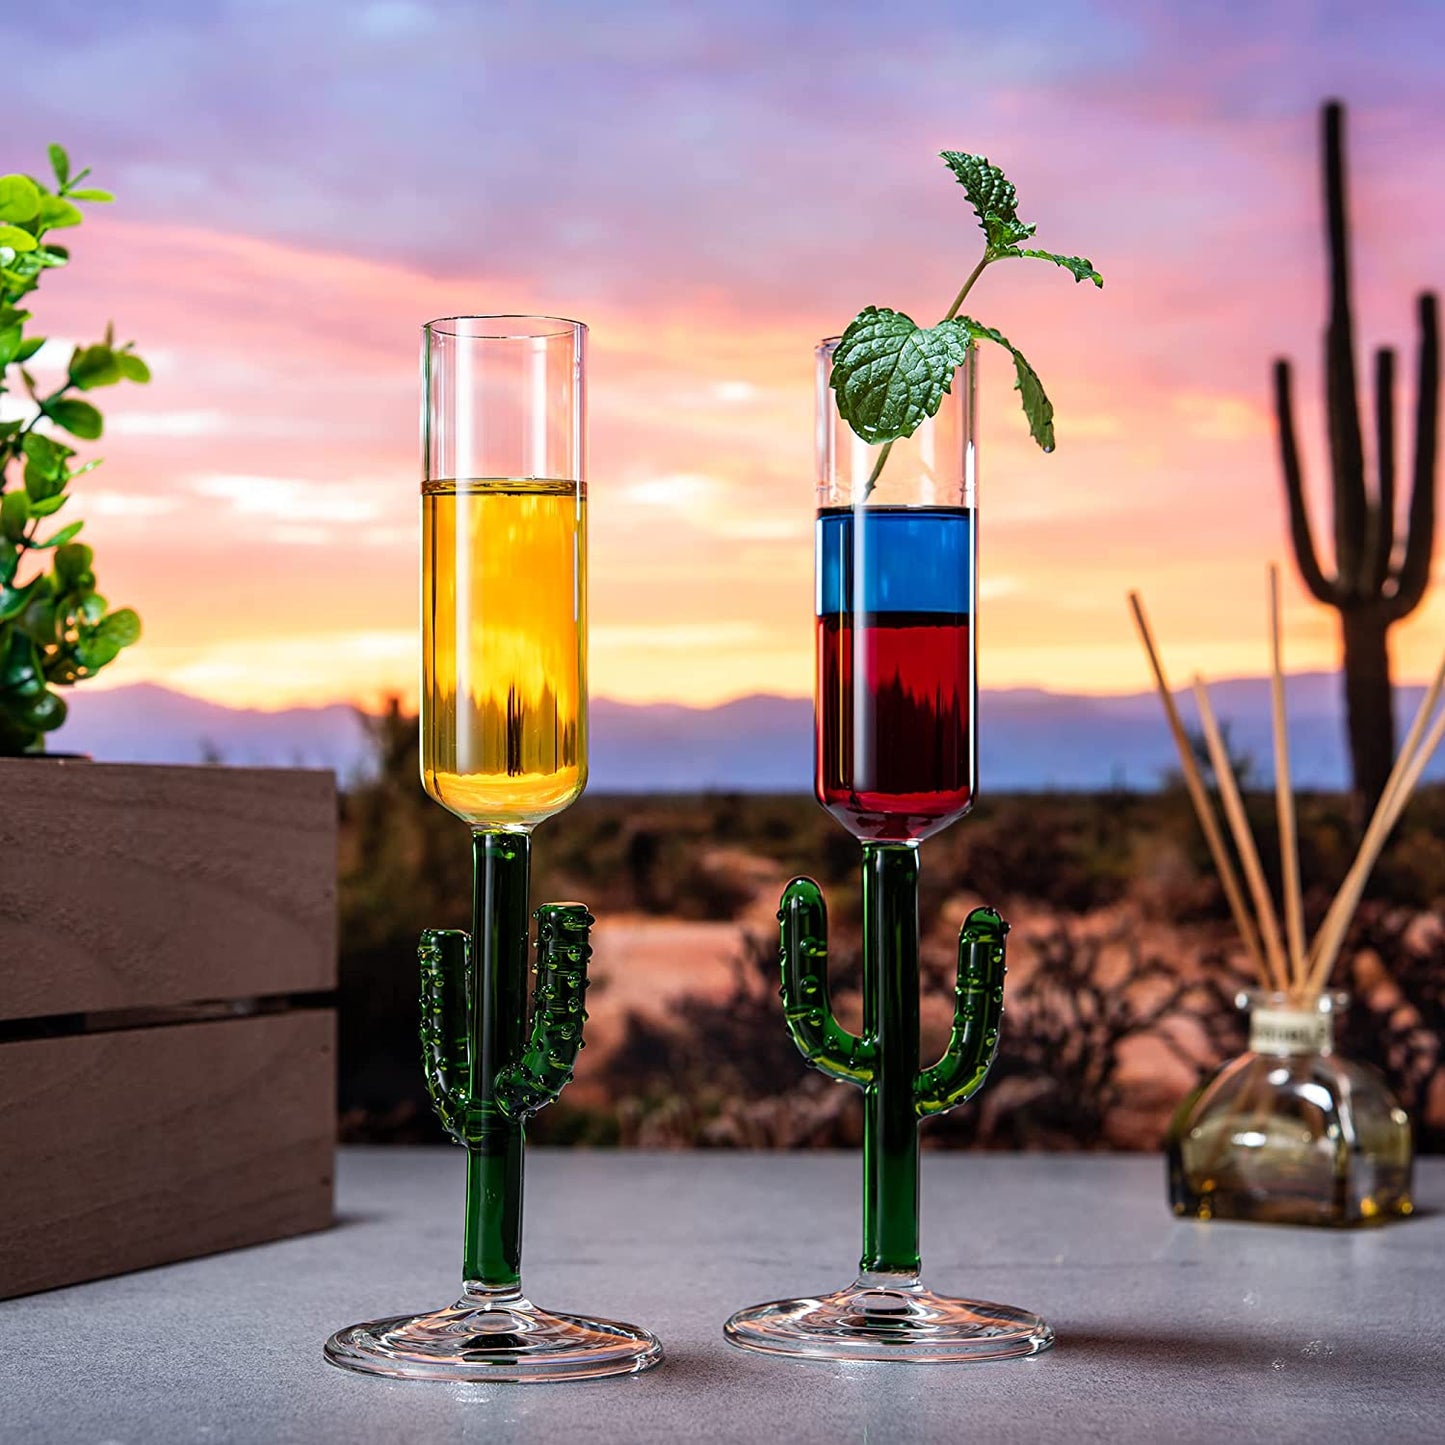 The Wine Savant - 4 Cactus Glasses - Green Colored Cocktail Glasses - Wedding Martini Party Glasses -Home Bar